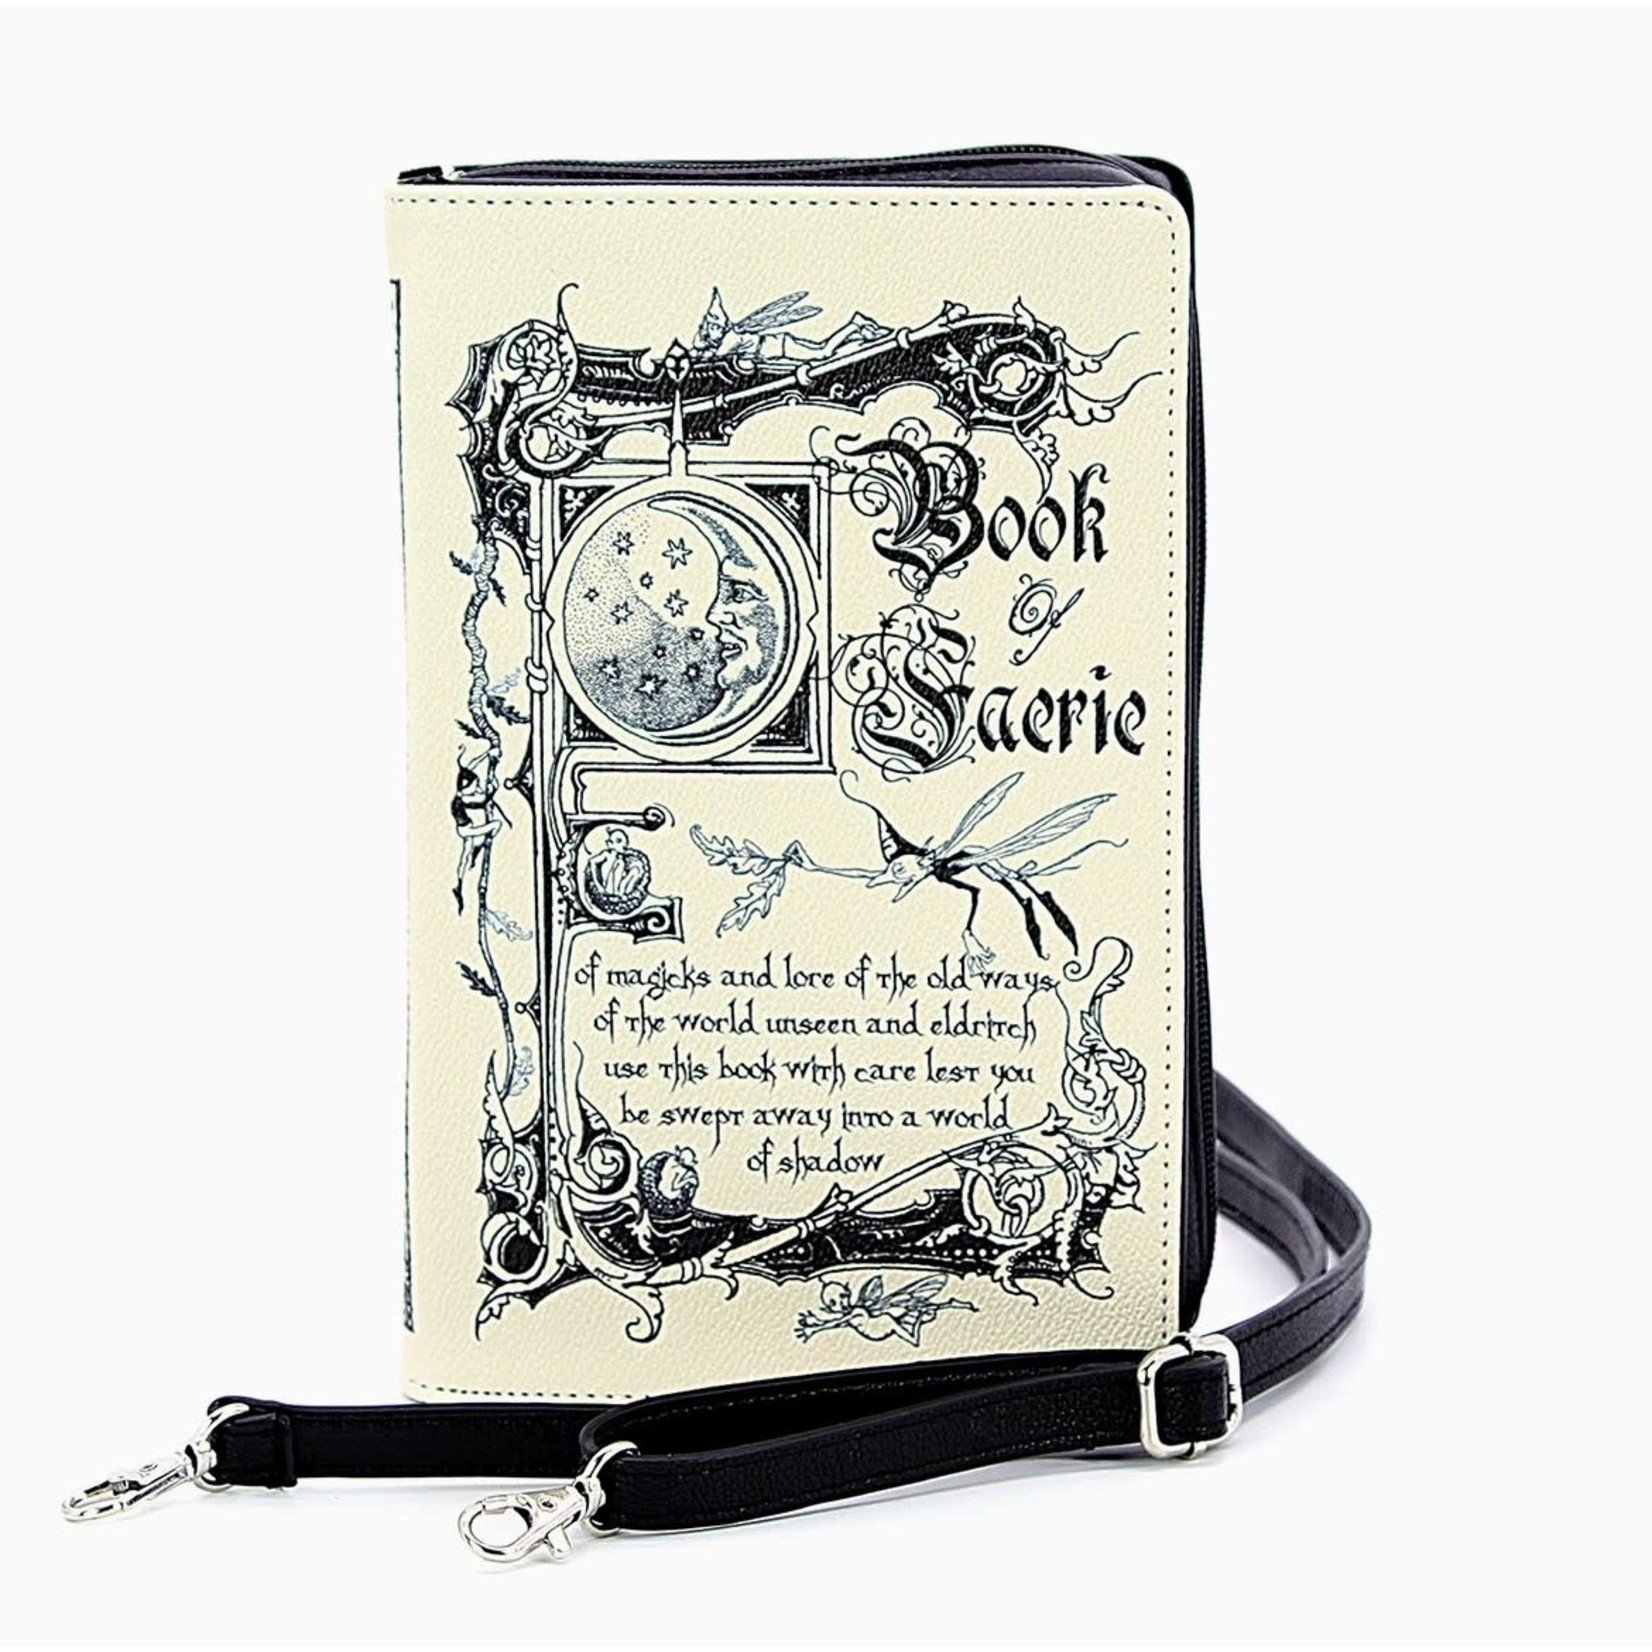 Once Upon A Time Story Book Hand Bag - Custom Book Replica / Clutch / Purse  / Satchel (Inspired by Once Upon A Time) - Geekify Inc